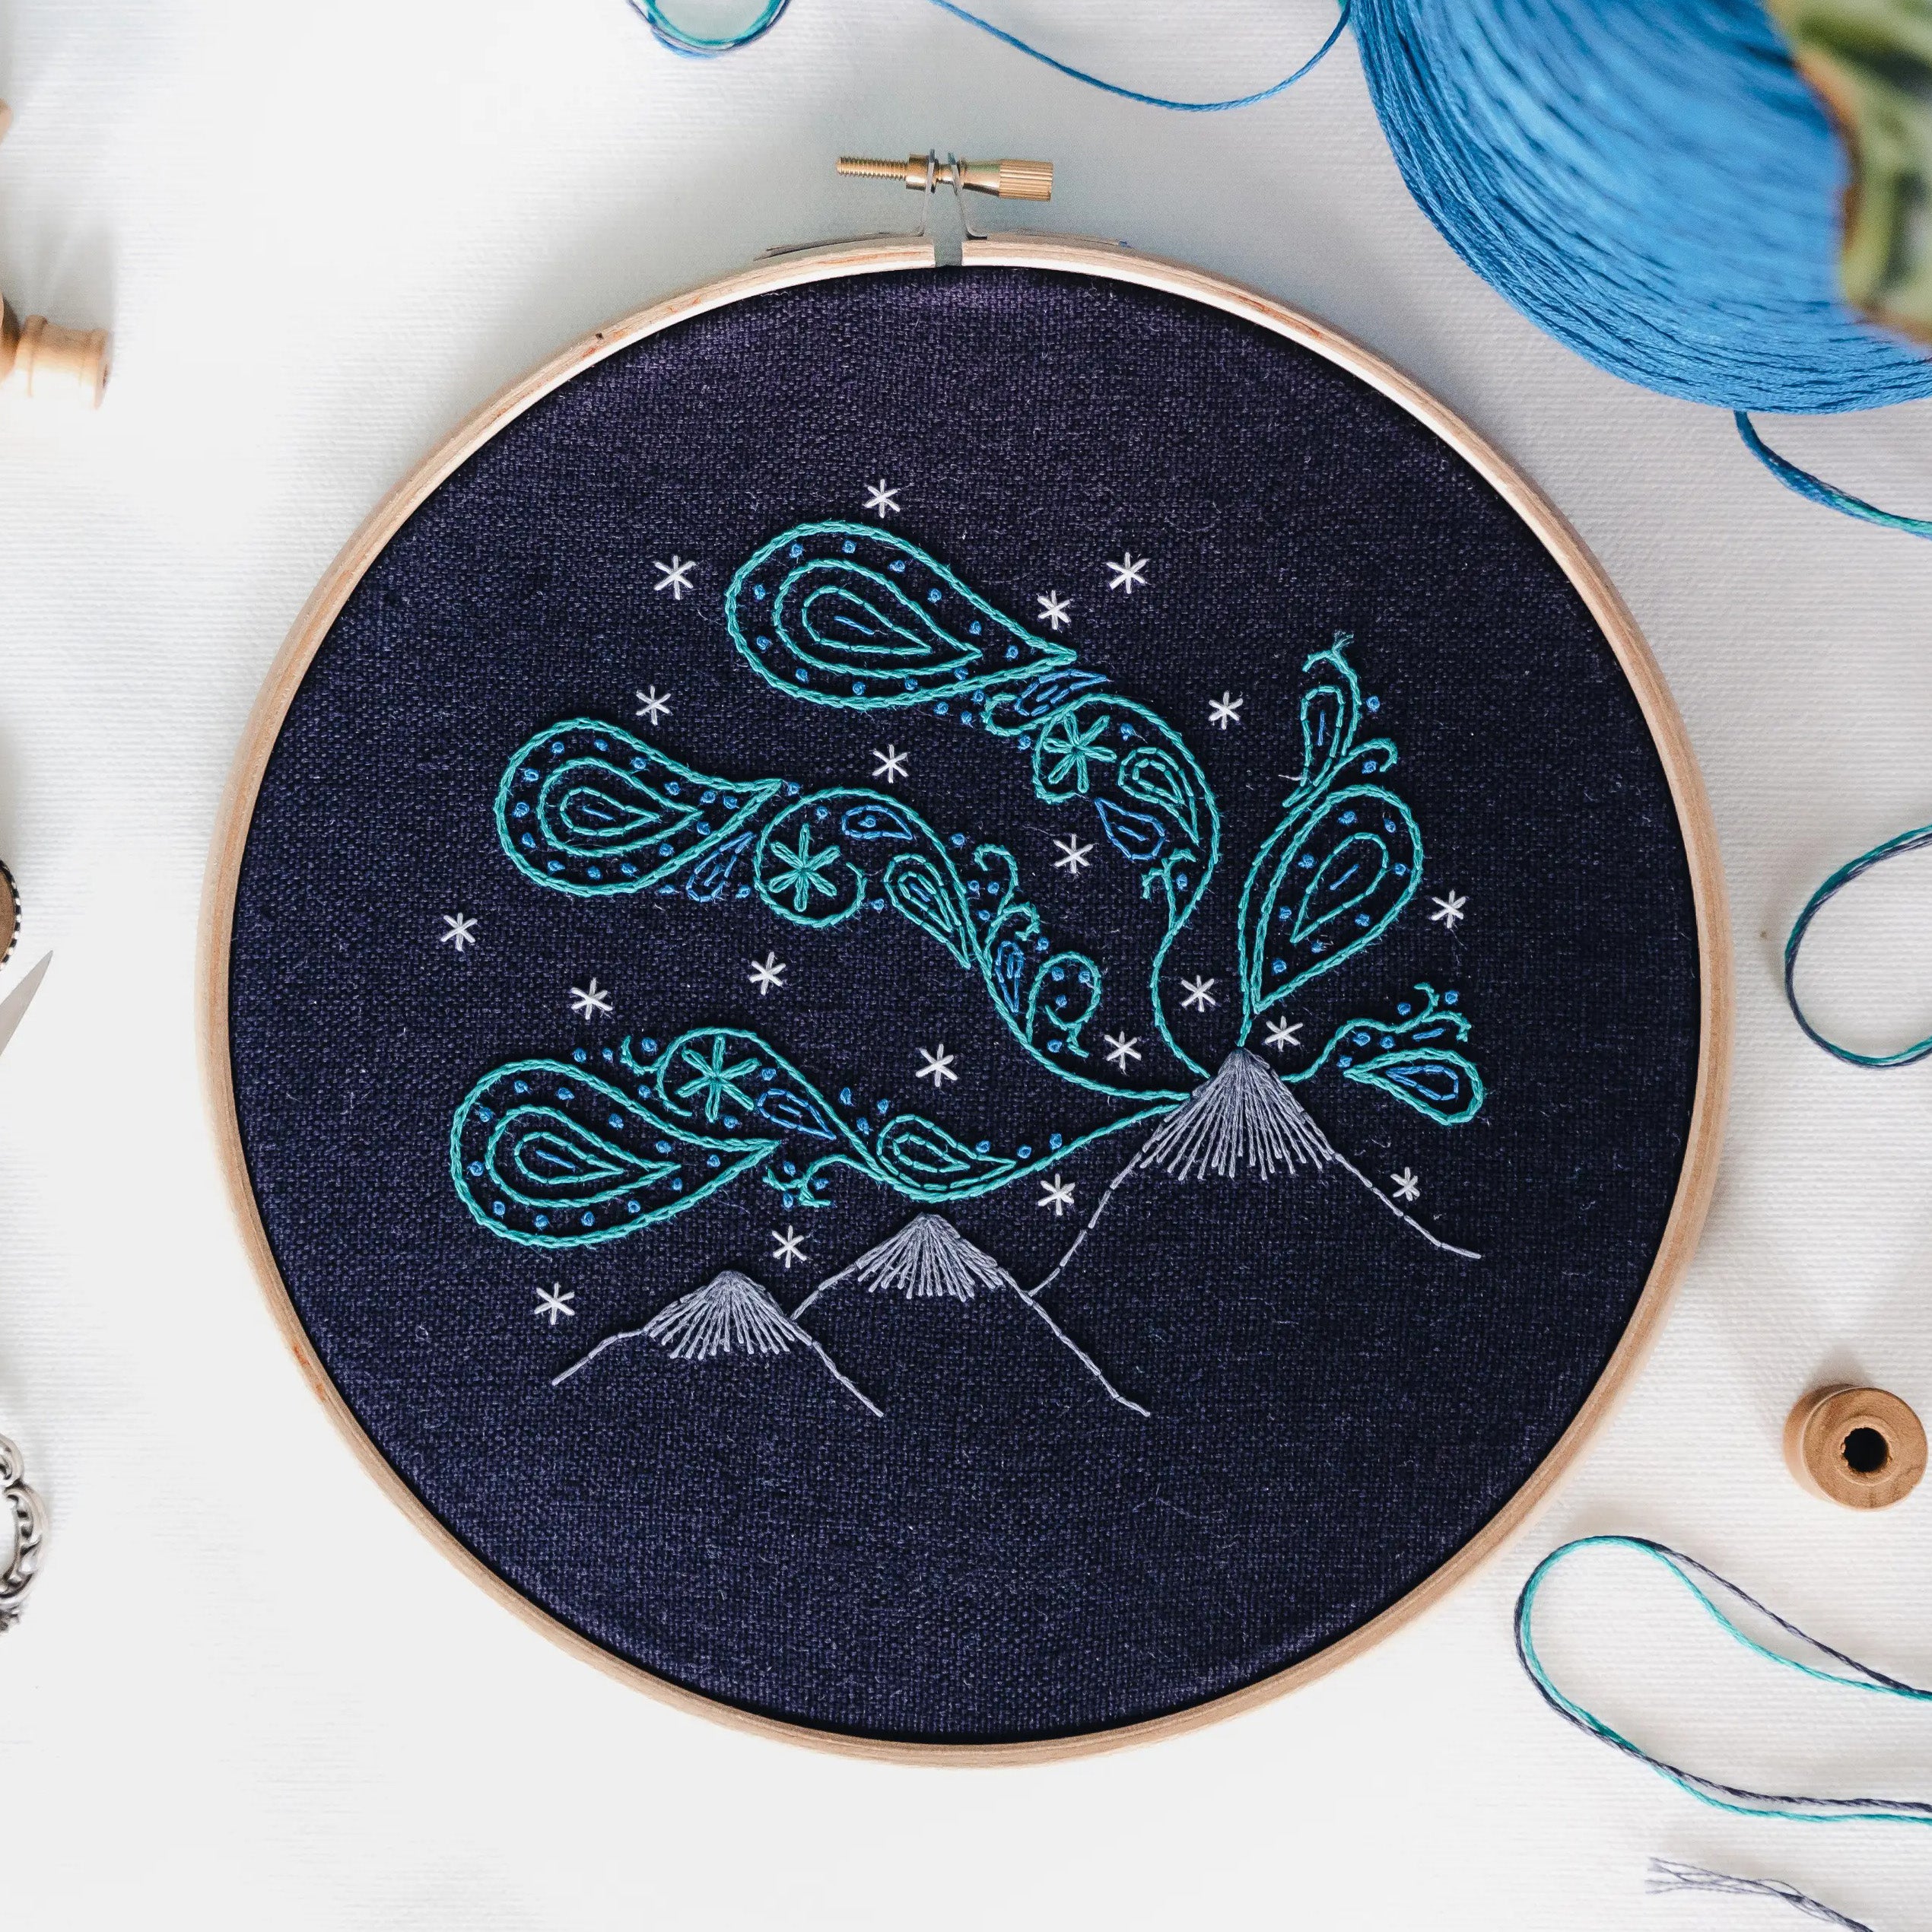 Northern Lights Hand Embroidery Kit - Stitched Modern